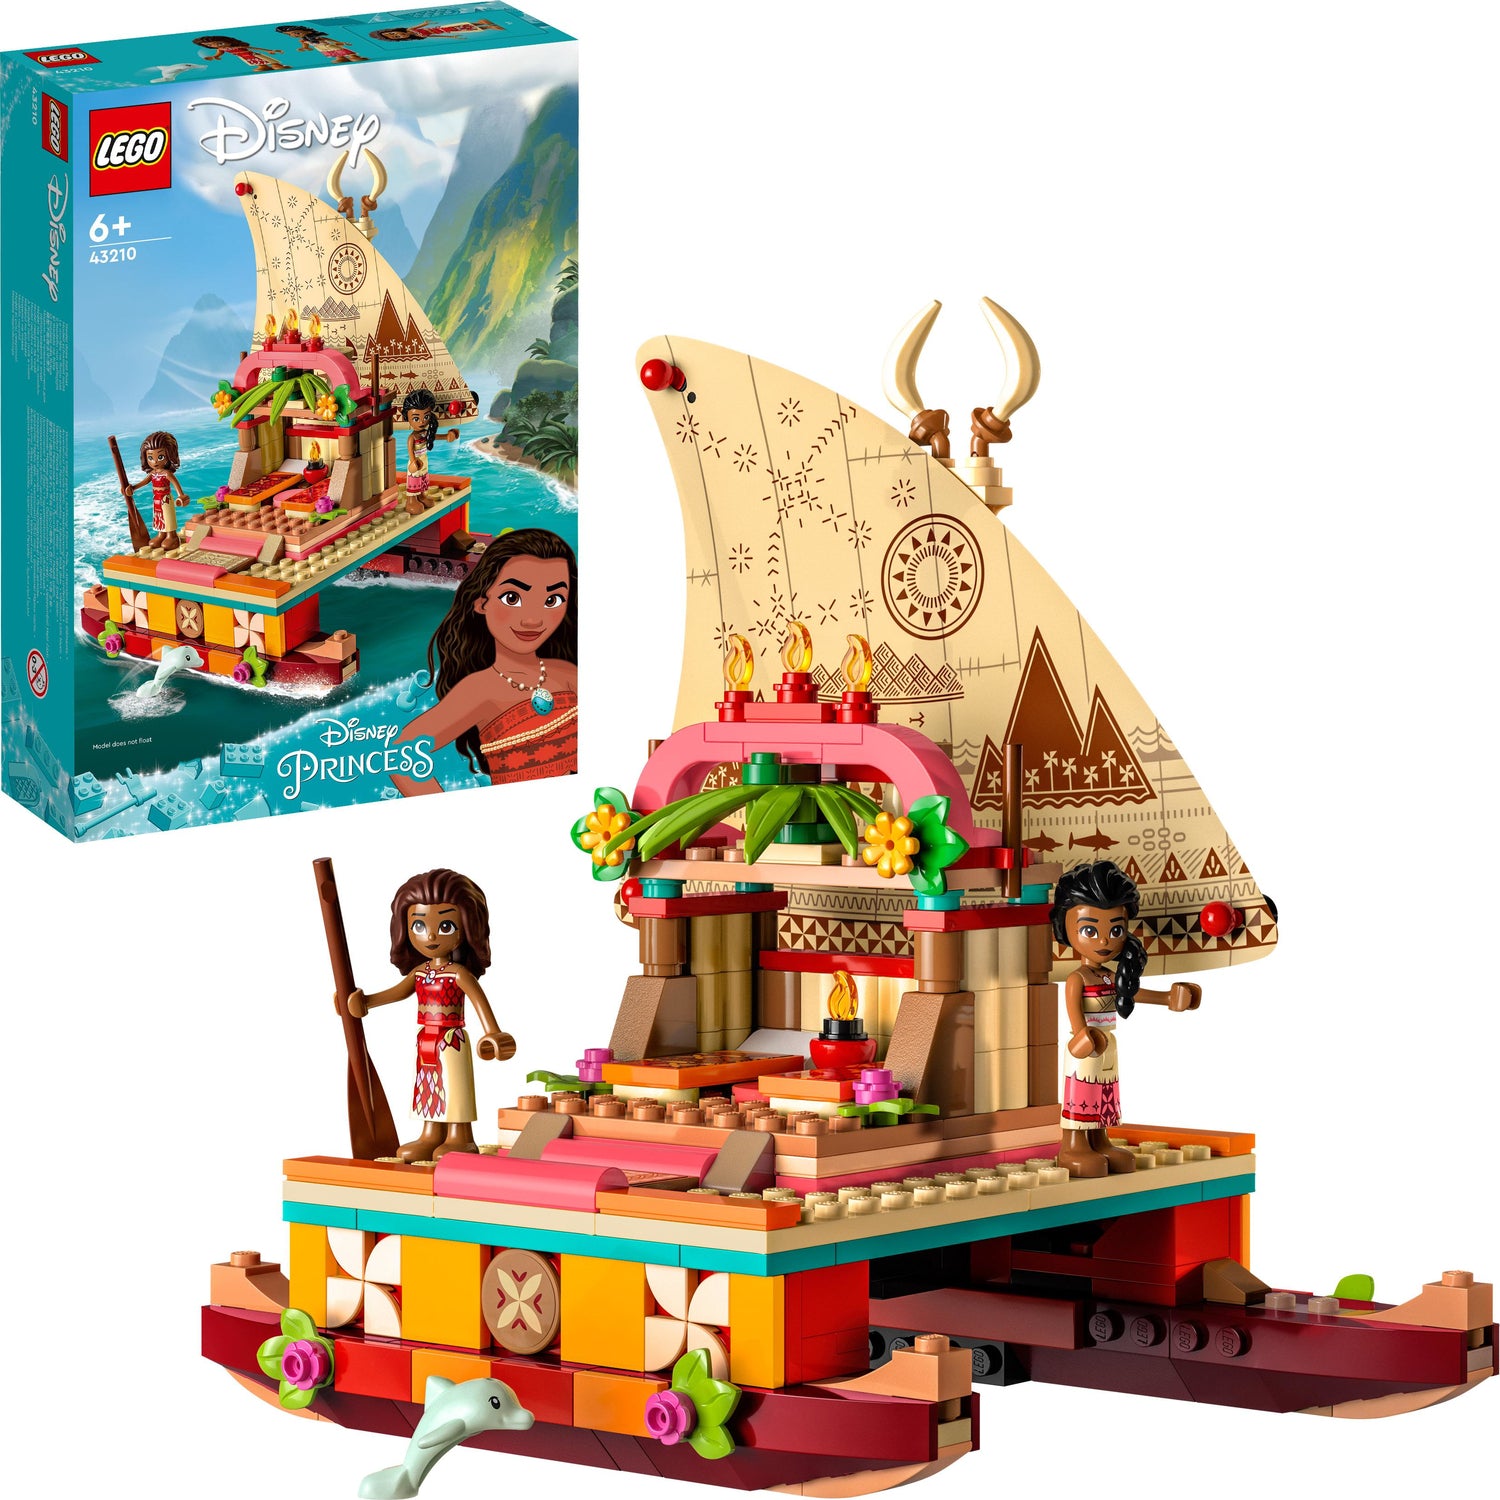 LEGO® Avatar™ Metkayina Reef Home – AG LEGO® Certified Stores